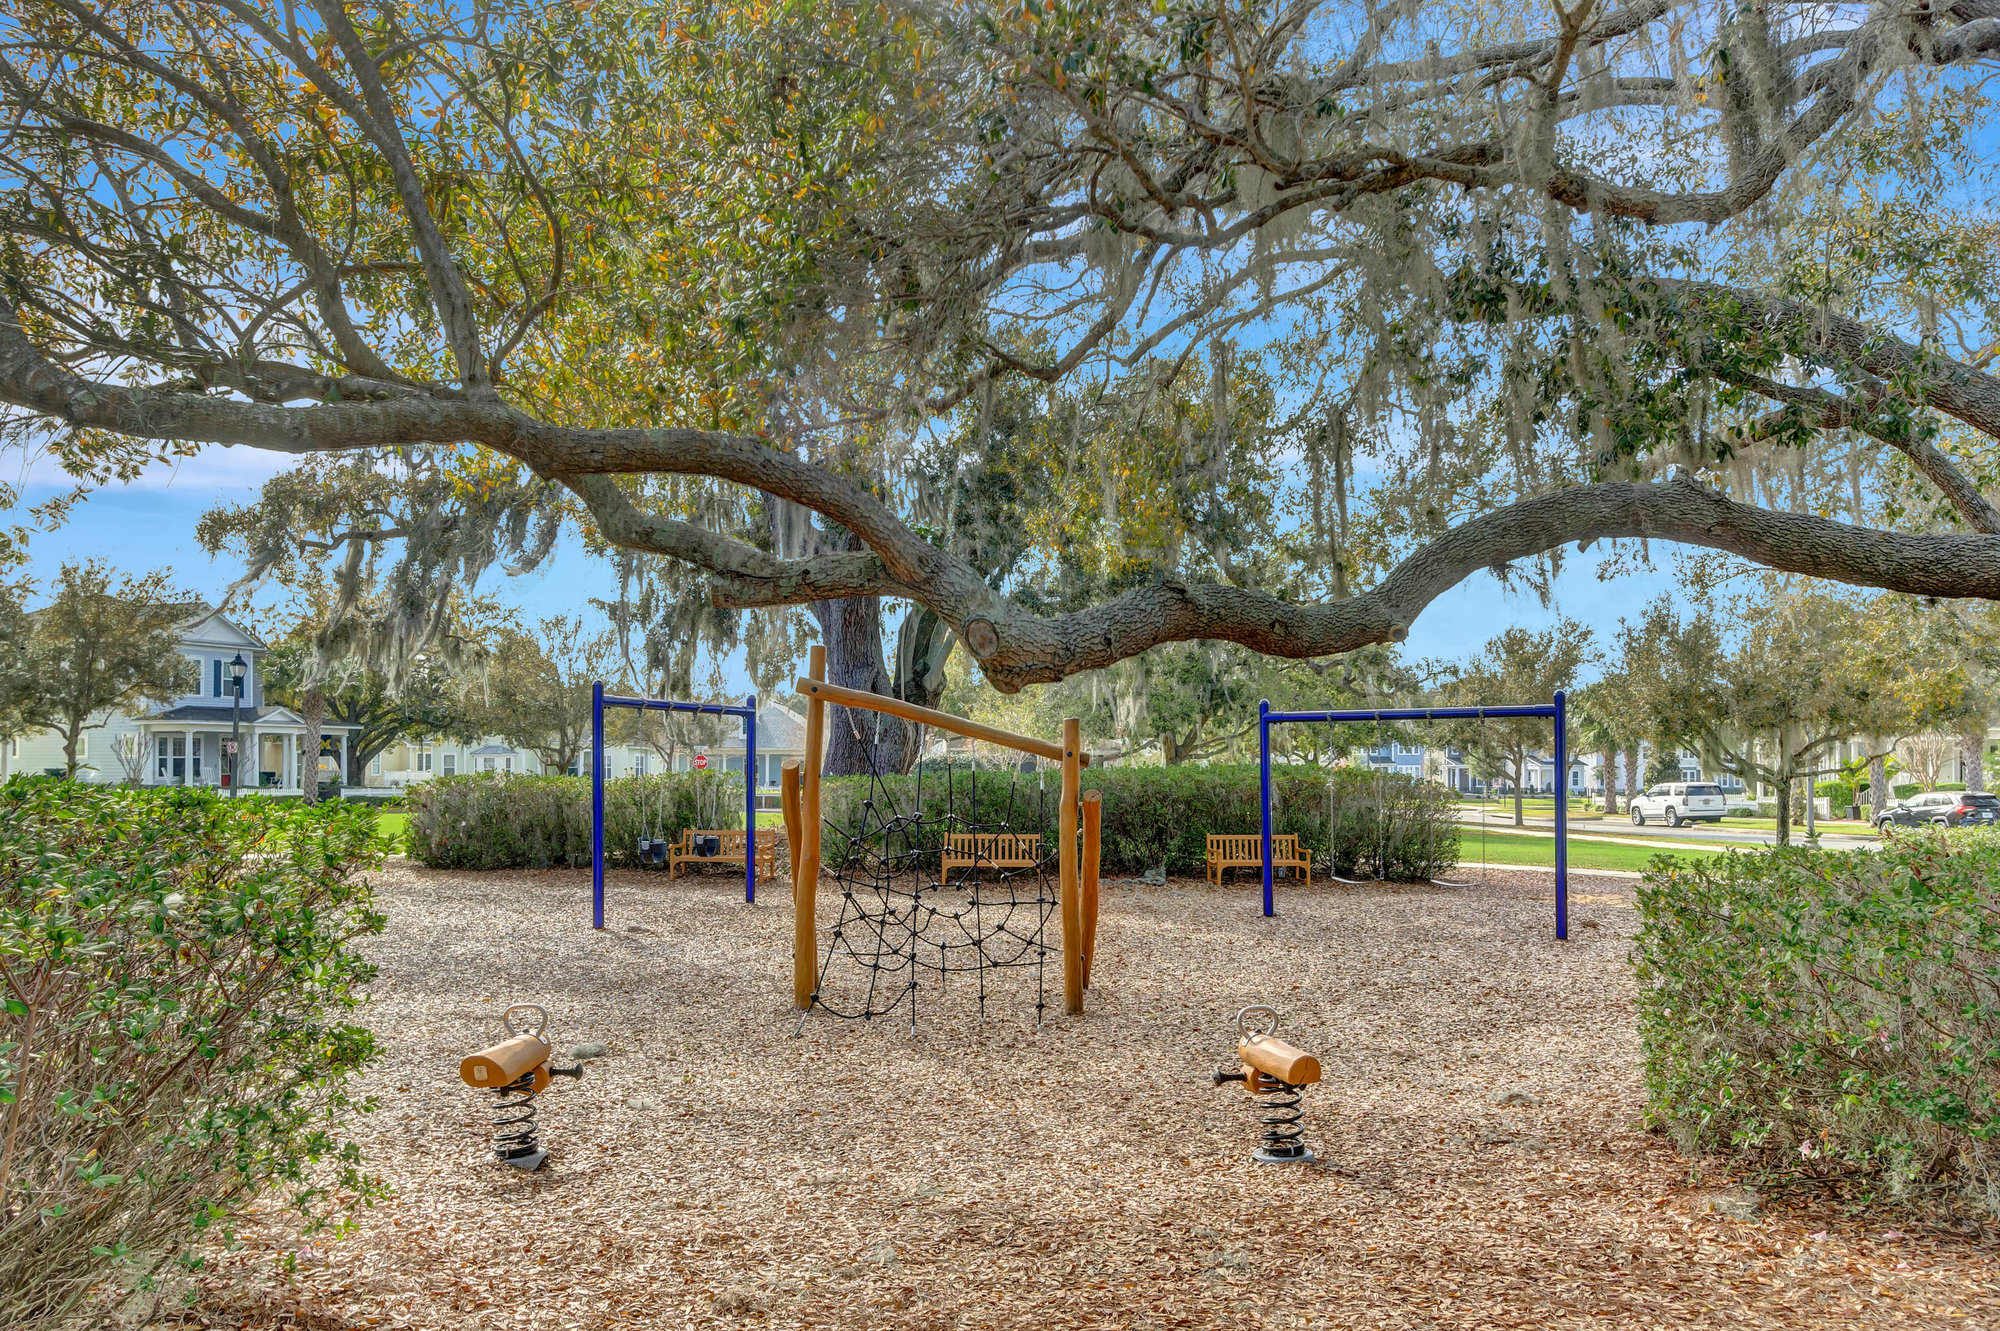 play ground with swings and large trees